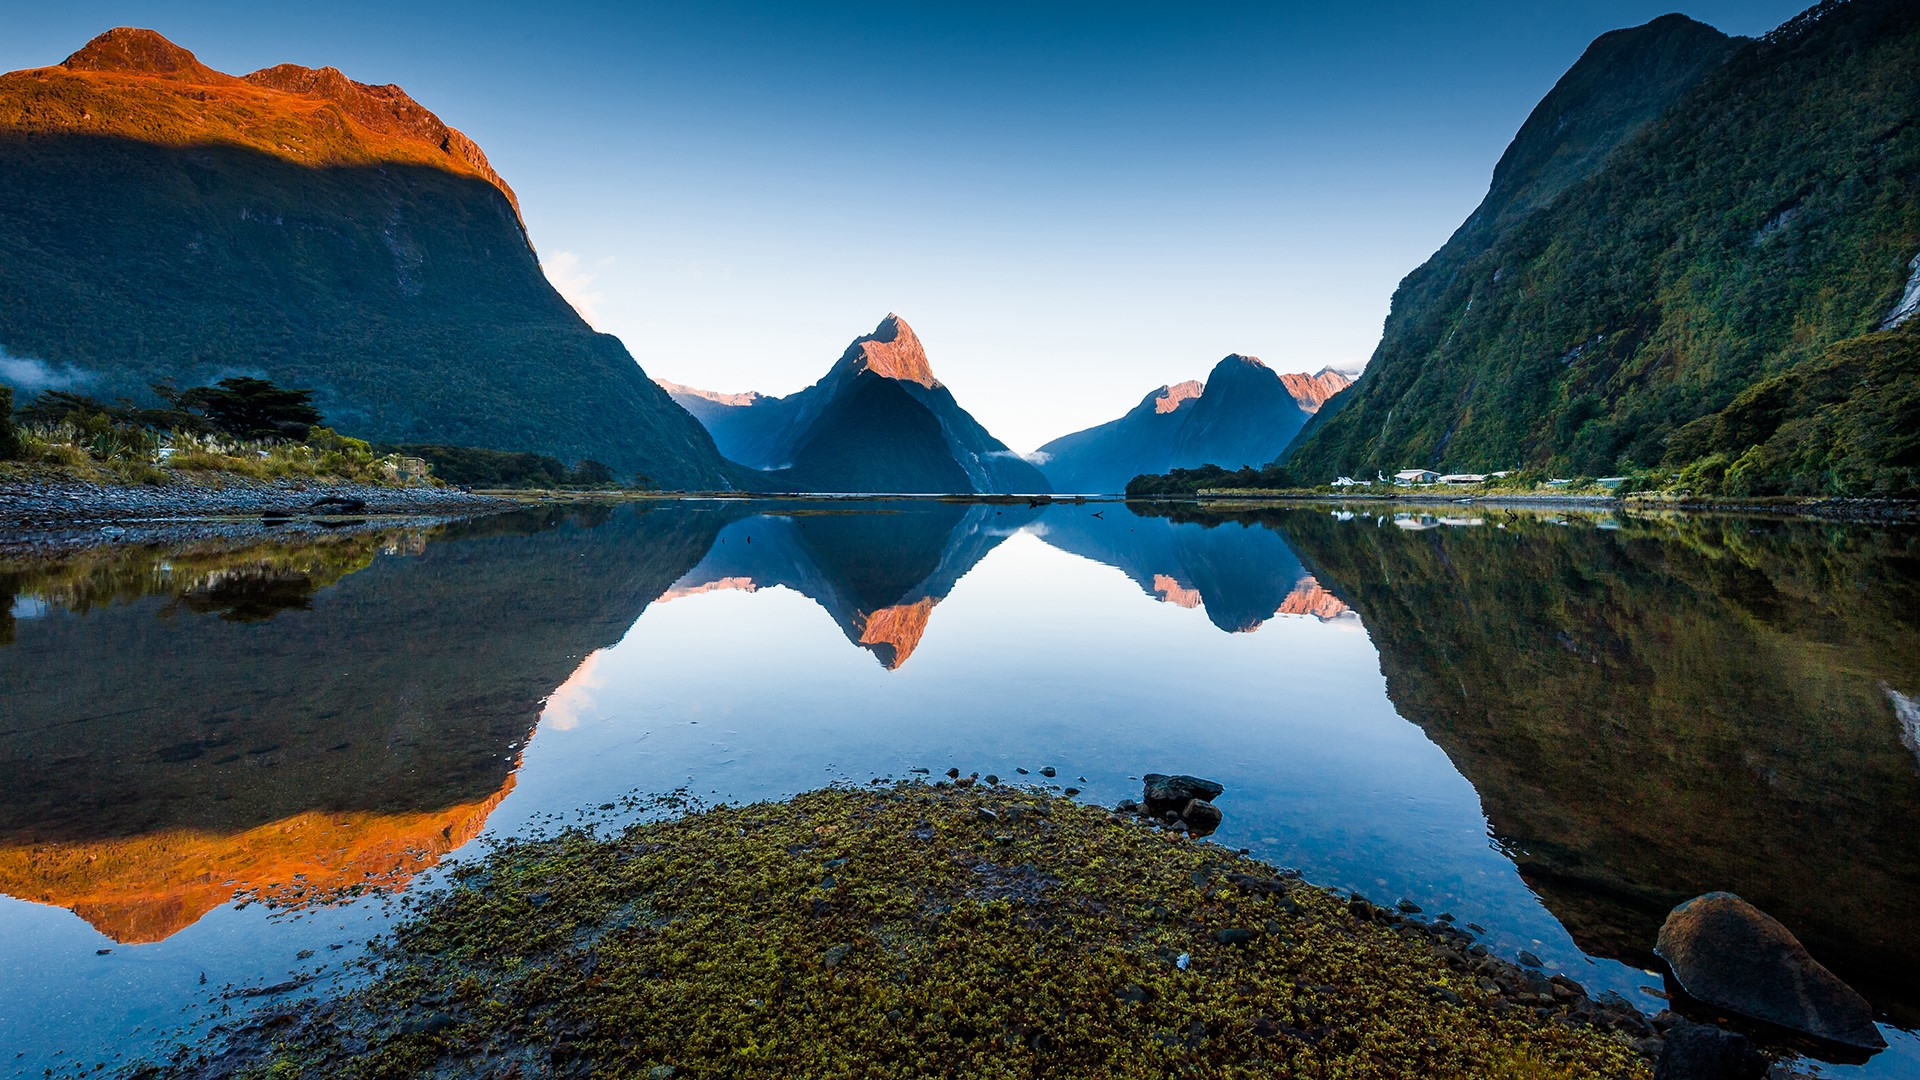 General 1920x1080 nature landscape mountains lake rocks water reflection clear sky sunlight house moss trees plants Fiordland National Park New Zealand Milford Sound